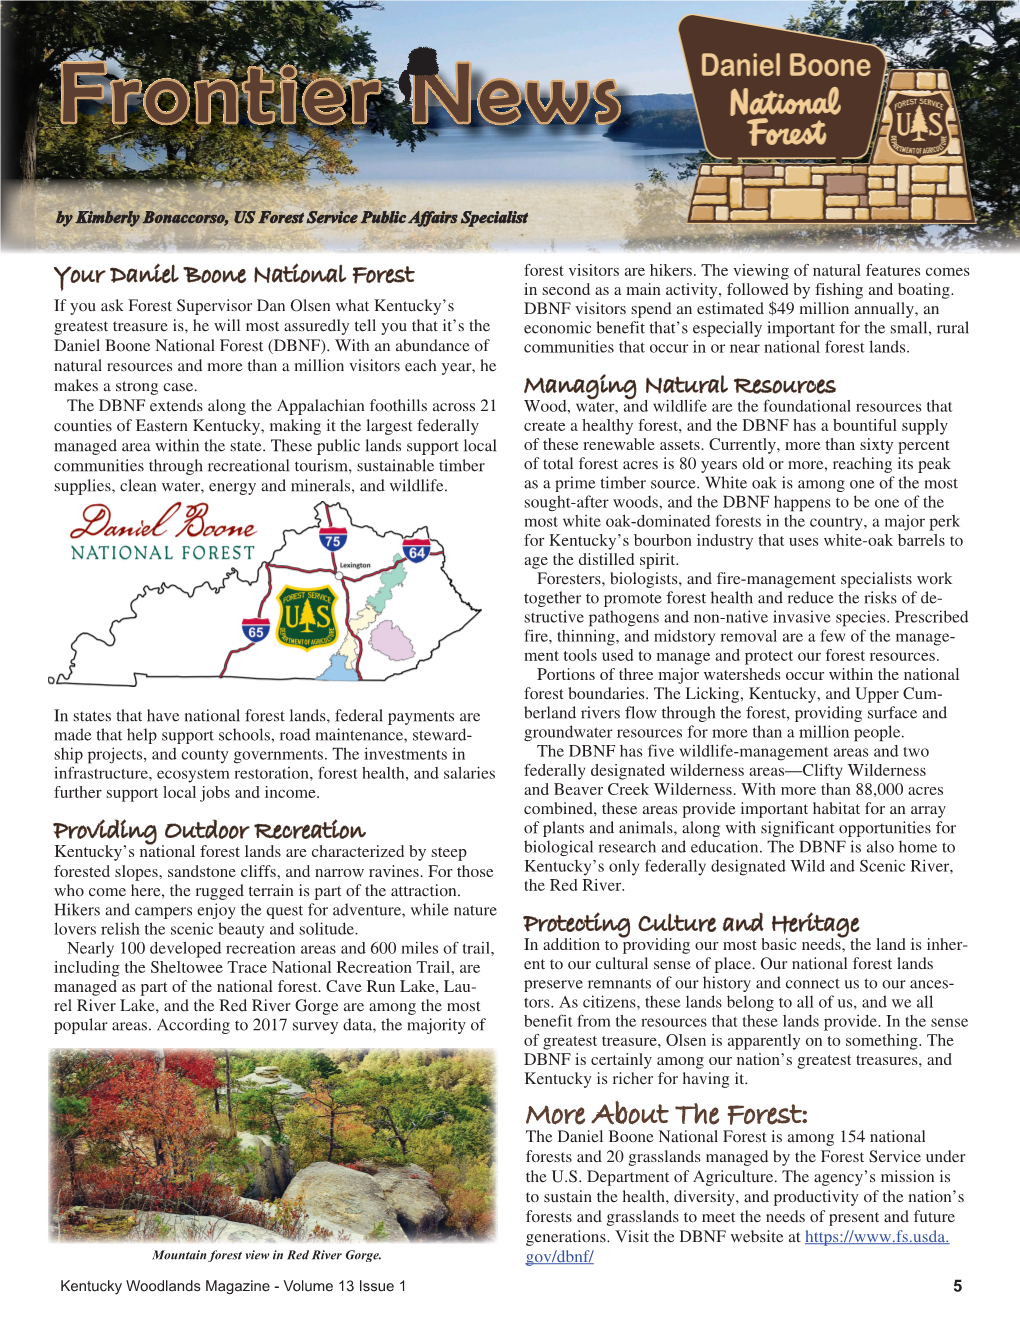 Frontier News: Daniel Boone National Forest